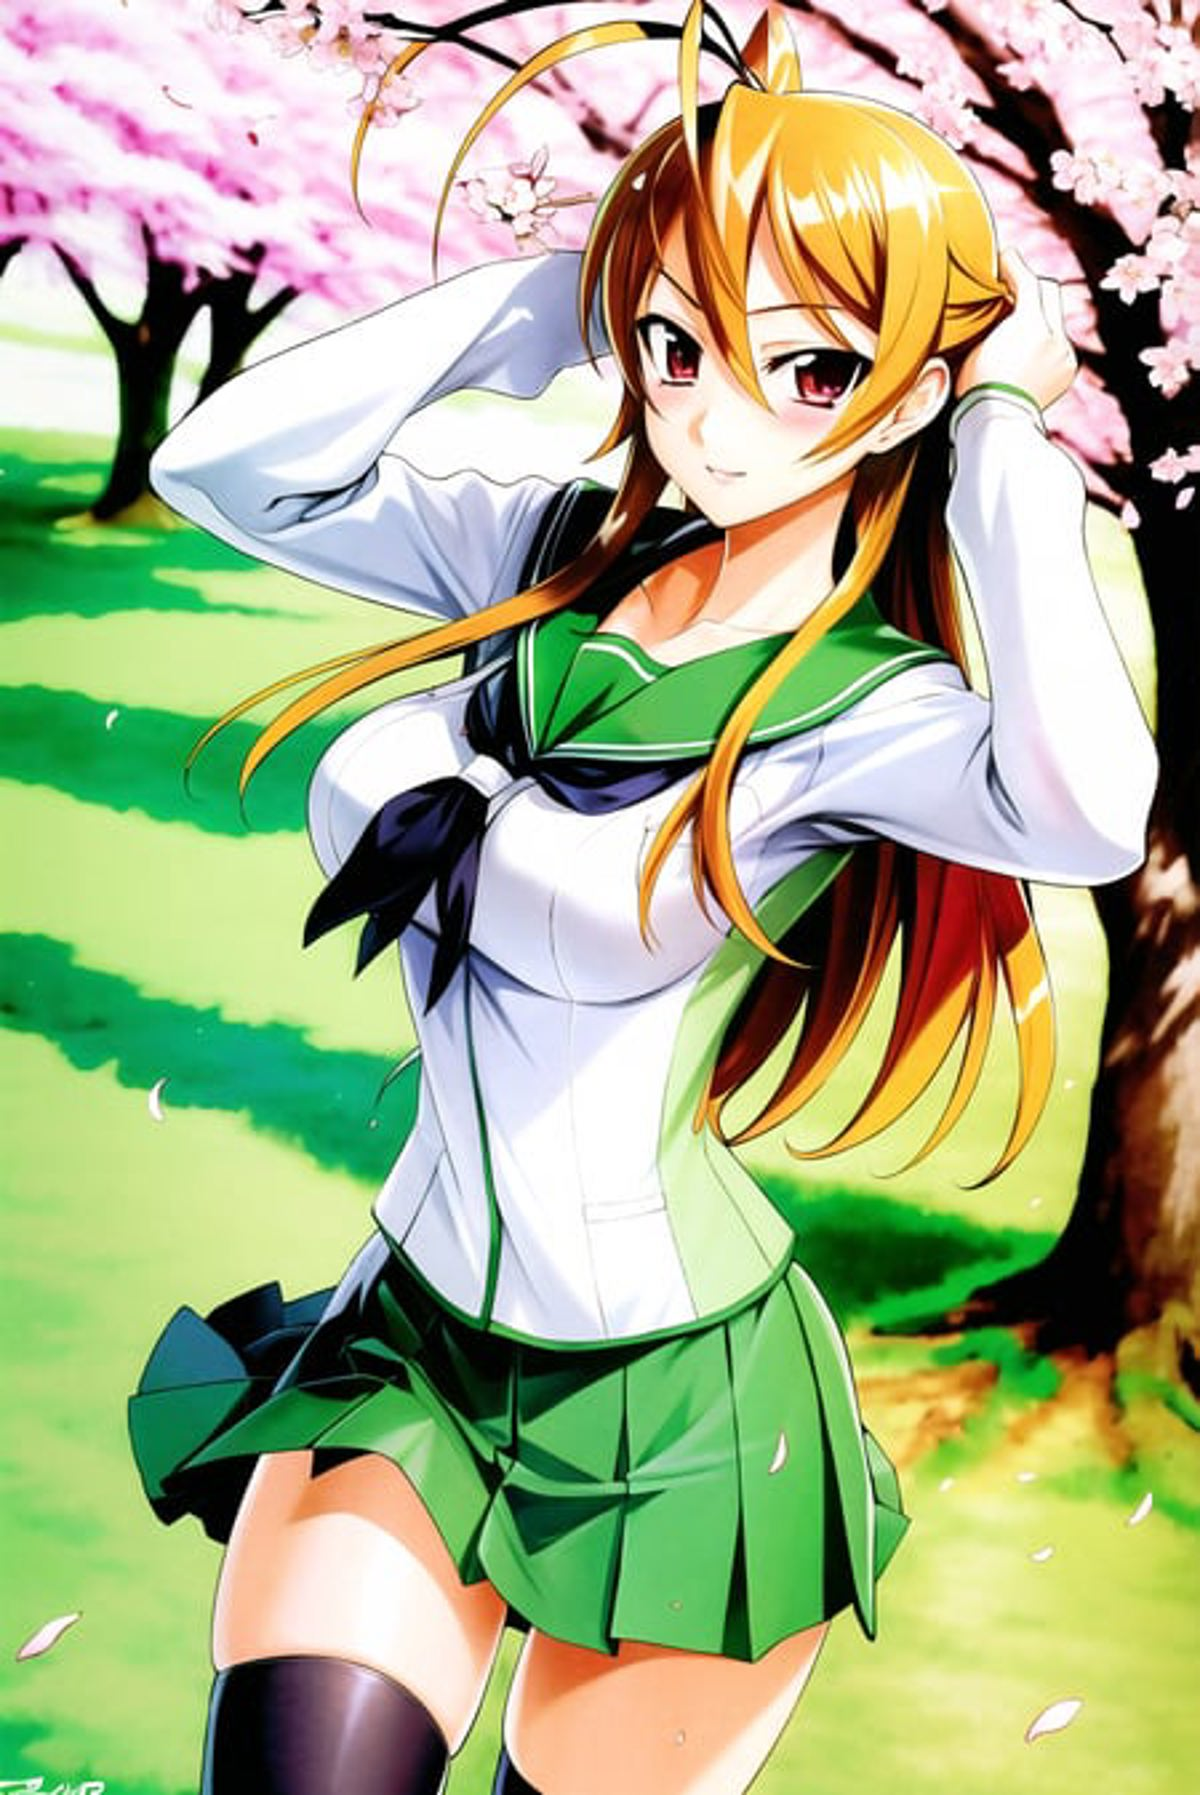 Return of the Highschool of the Dead - L7 World